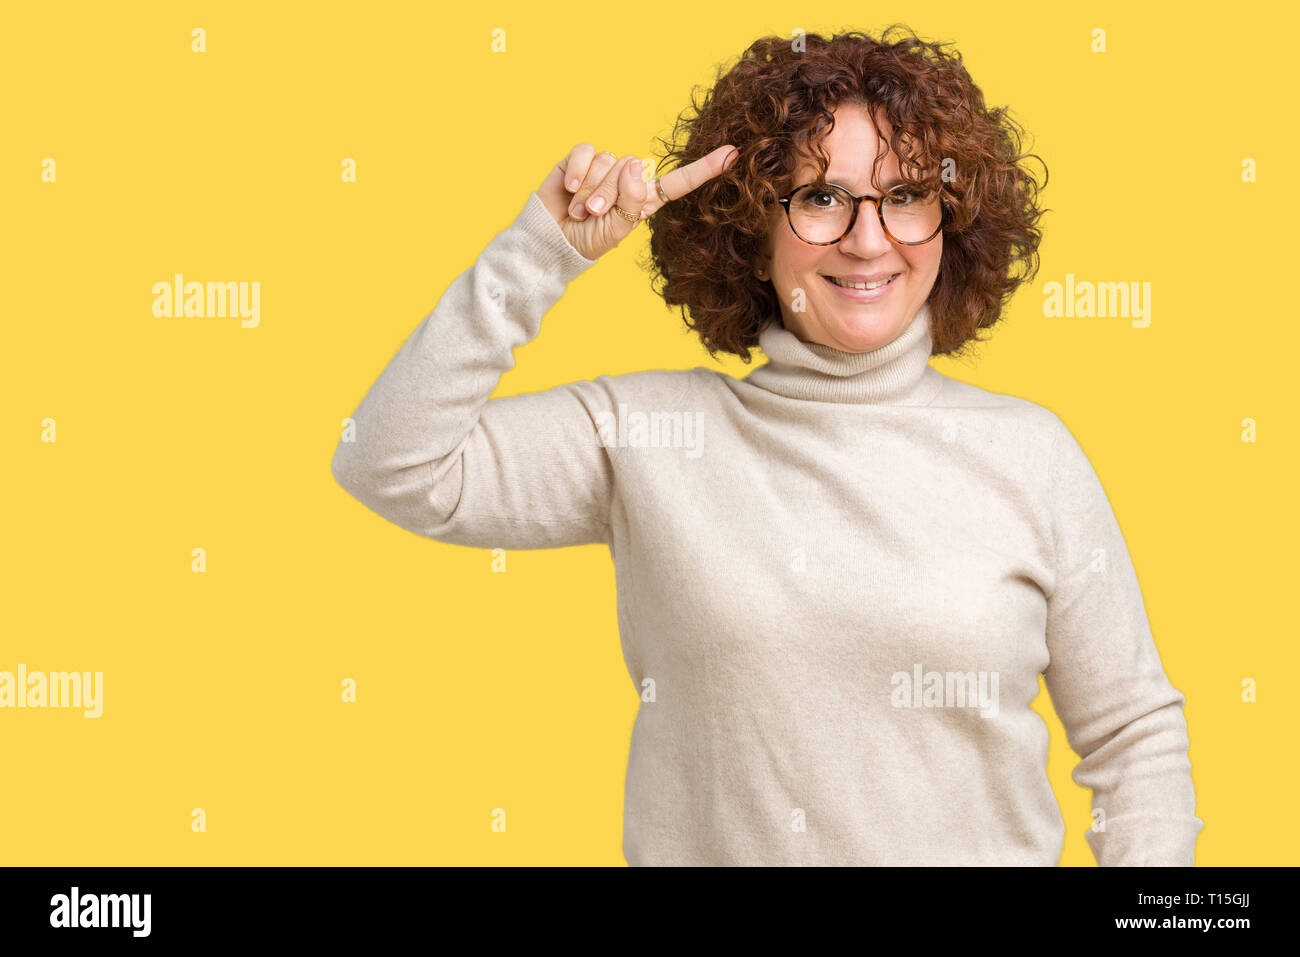 Beautiful middle ager senior woman wearing turtleneck sweater and glasses over isolated background Smiling pointing to head with one finger, great ide Stock Photo